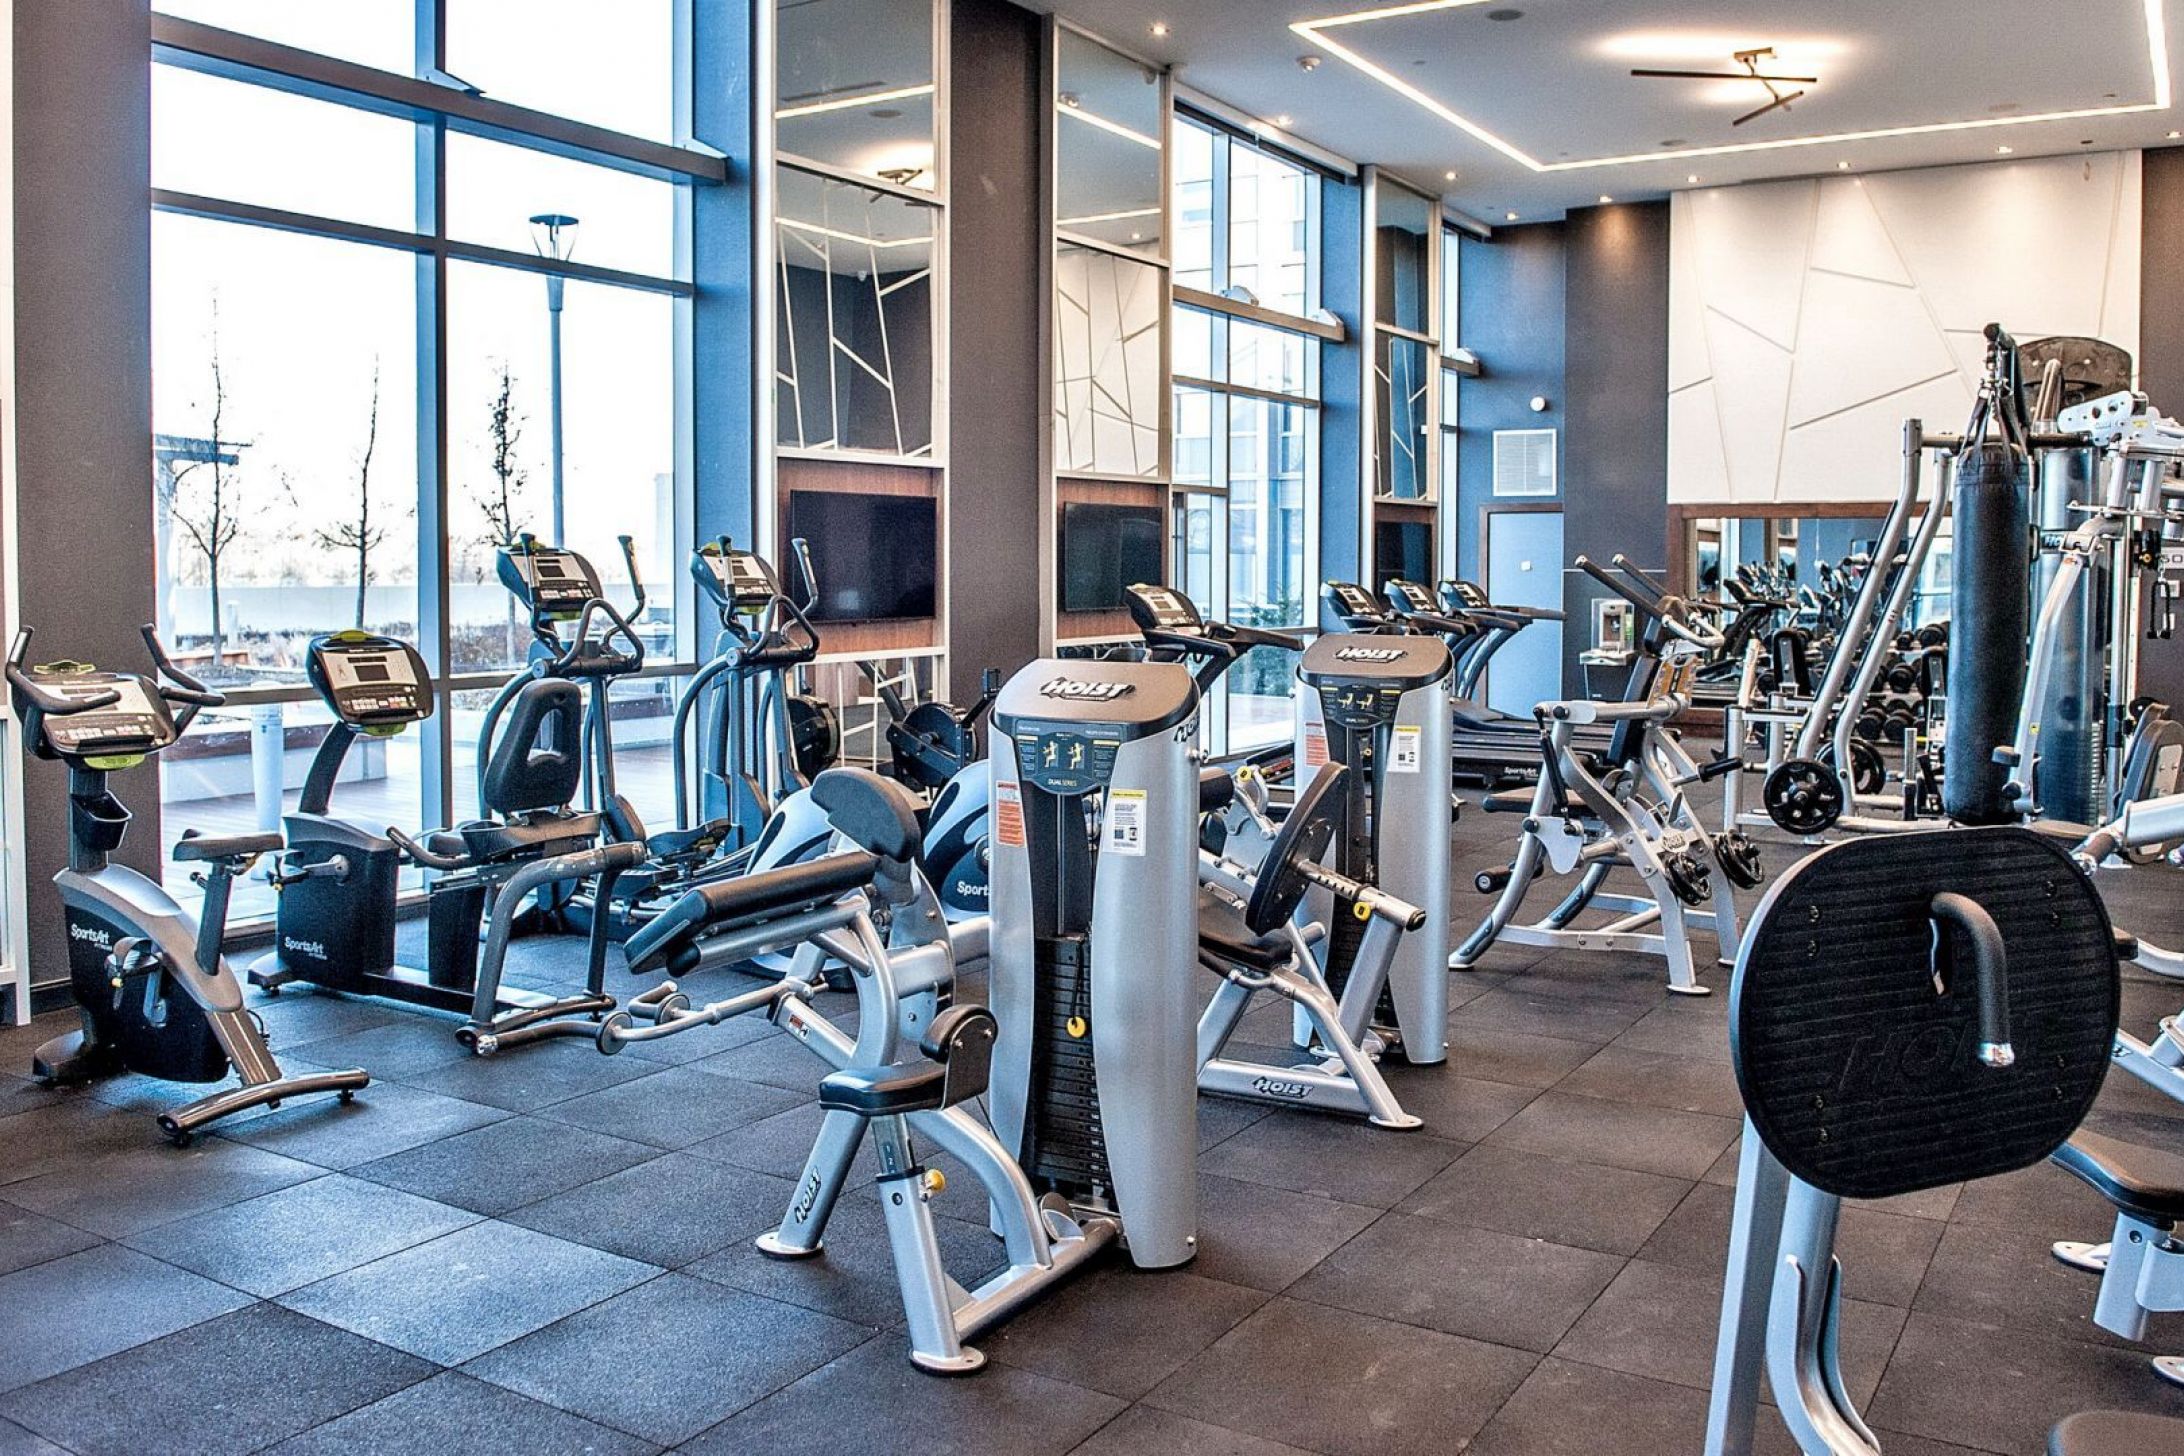 Gym at one of the Metrogate Condos Avani